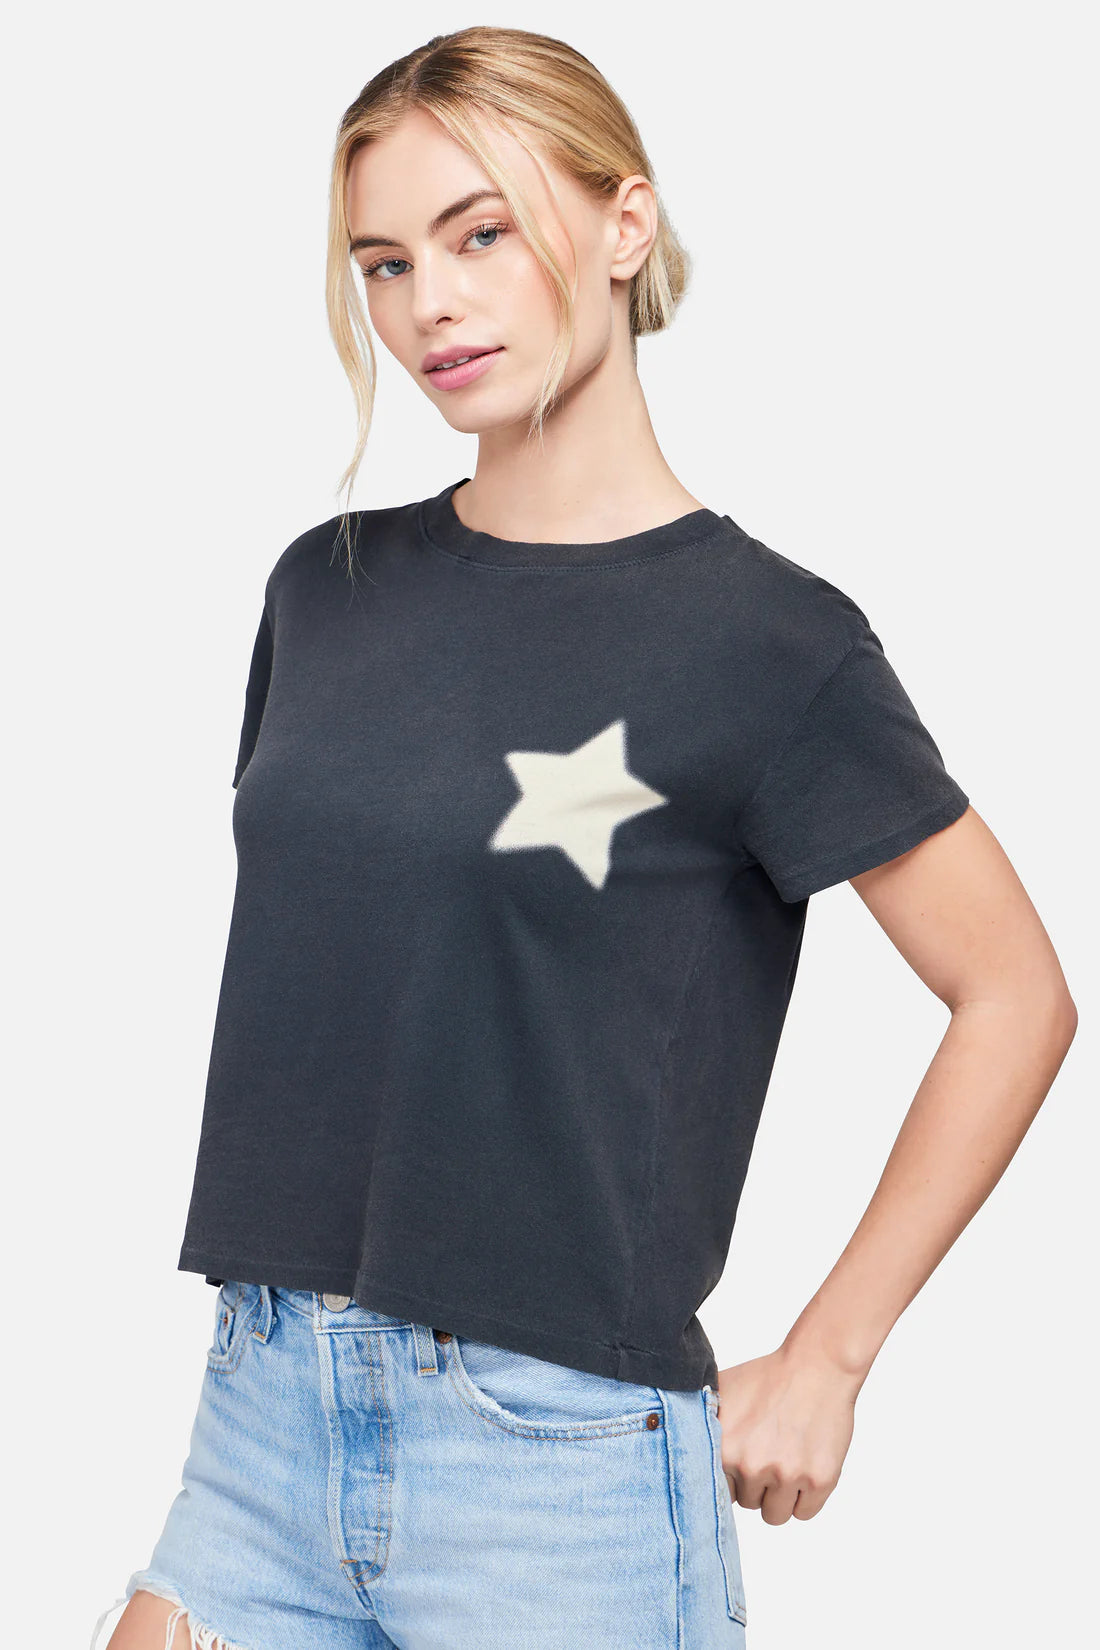 WILDFOX Blurred Star Charlie Top - Washed Black